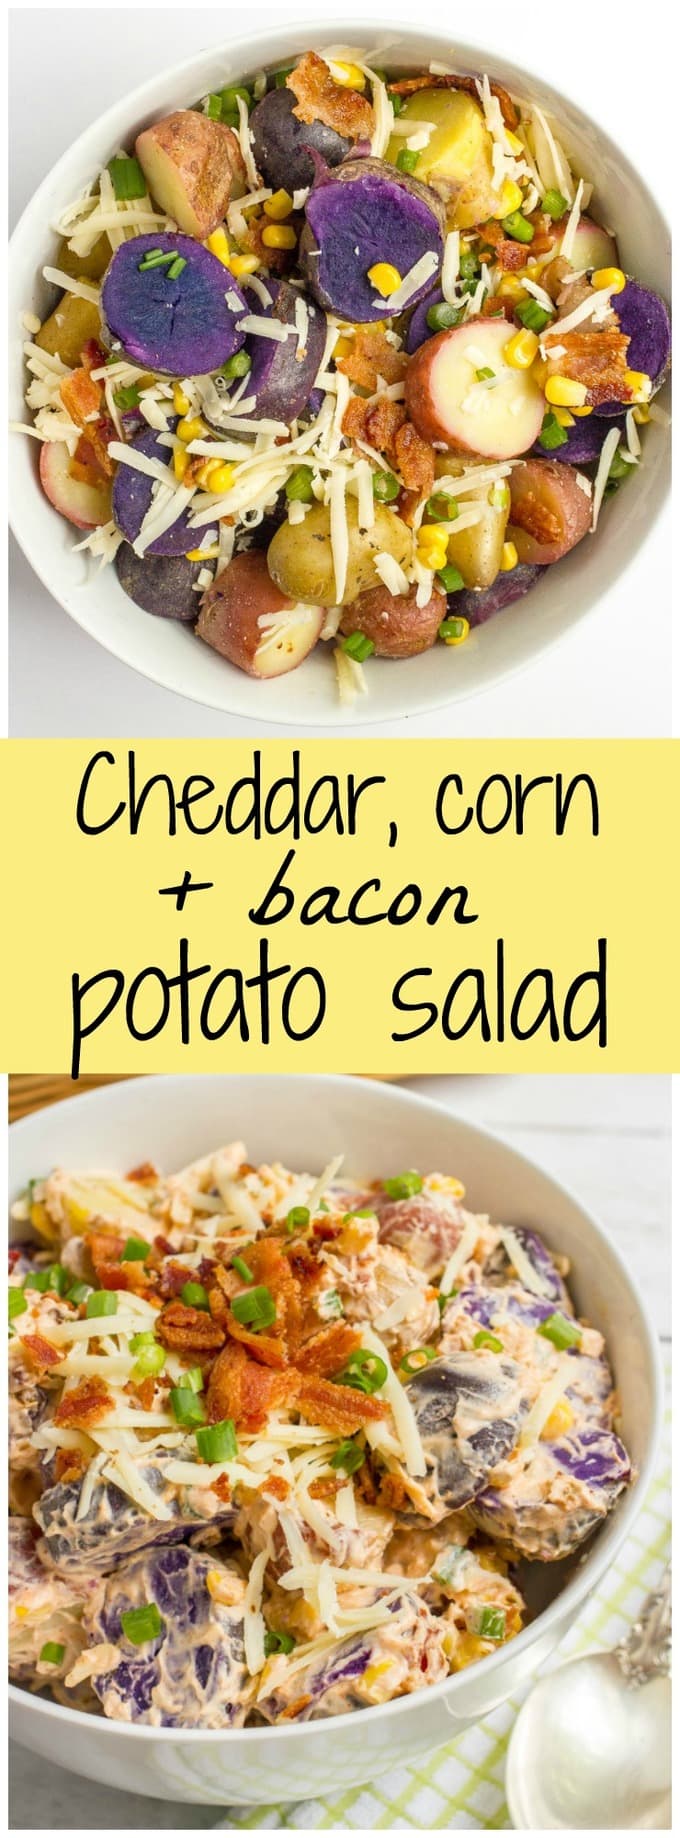 Cheddar corn and bacon potato salad with red, white and 'blue' potatoes is a great side dish for summer BBQs, cookouts, picnics and parties!